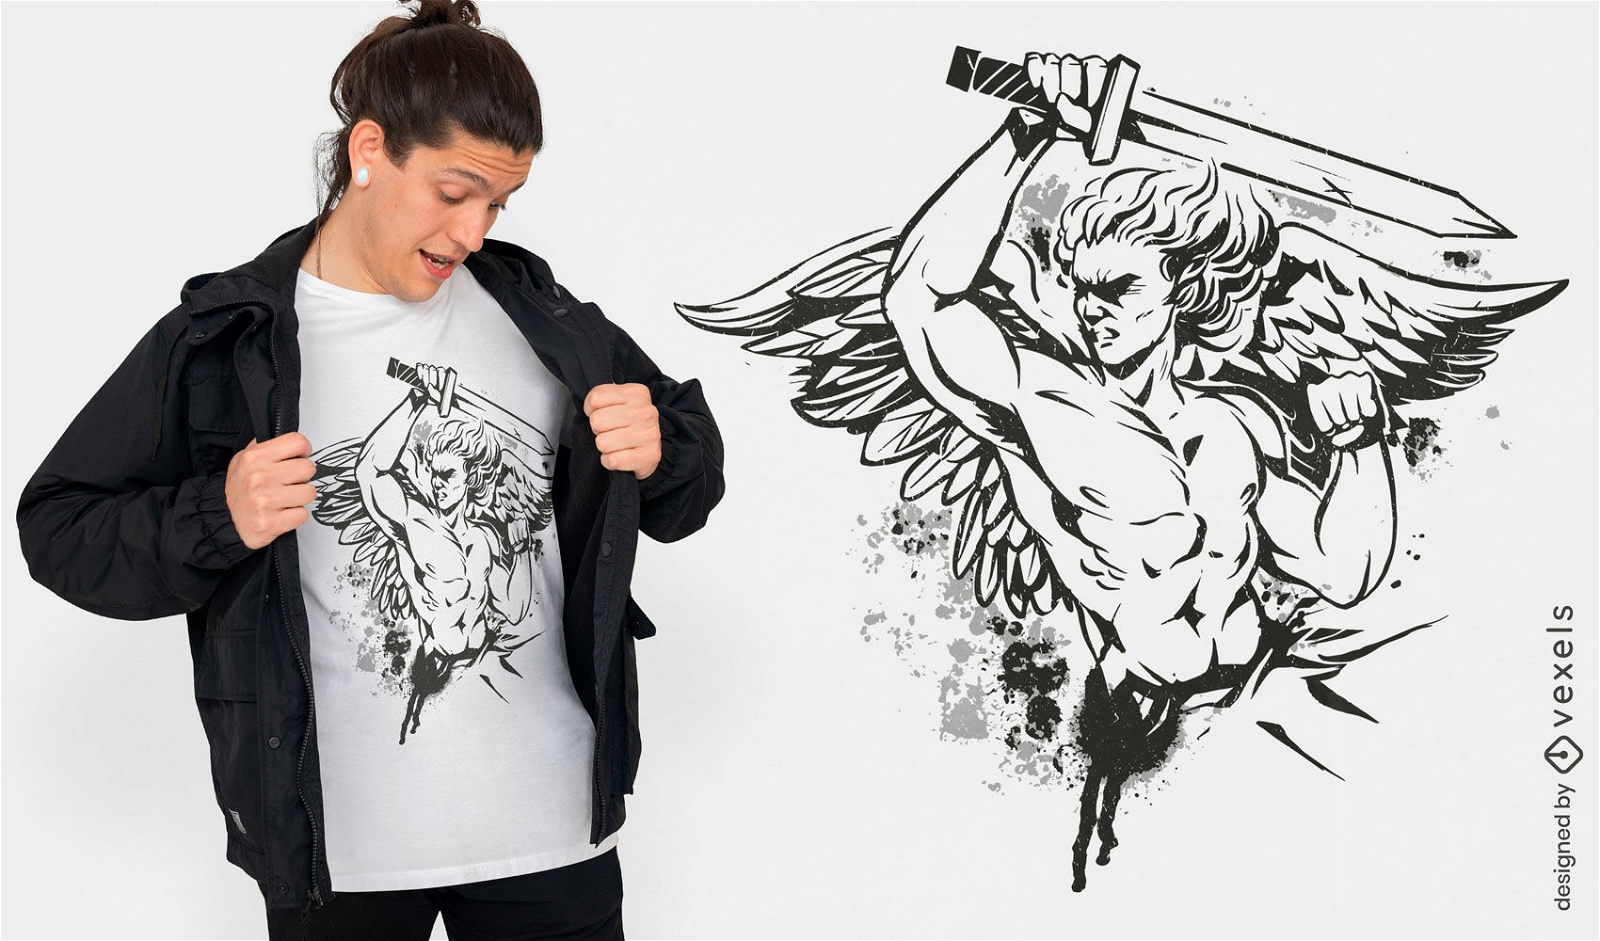 Man with wings and sword t-shirt design